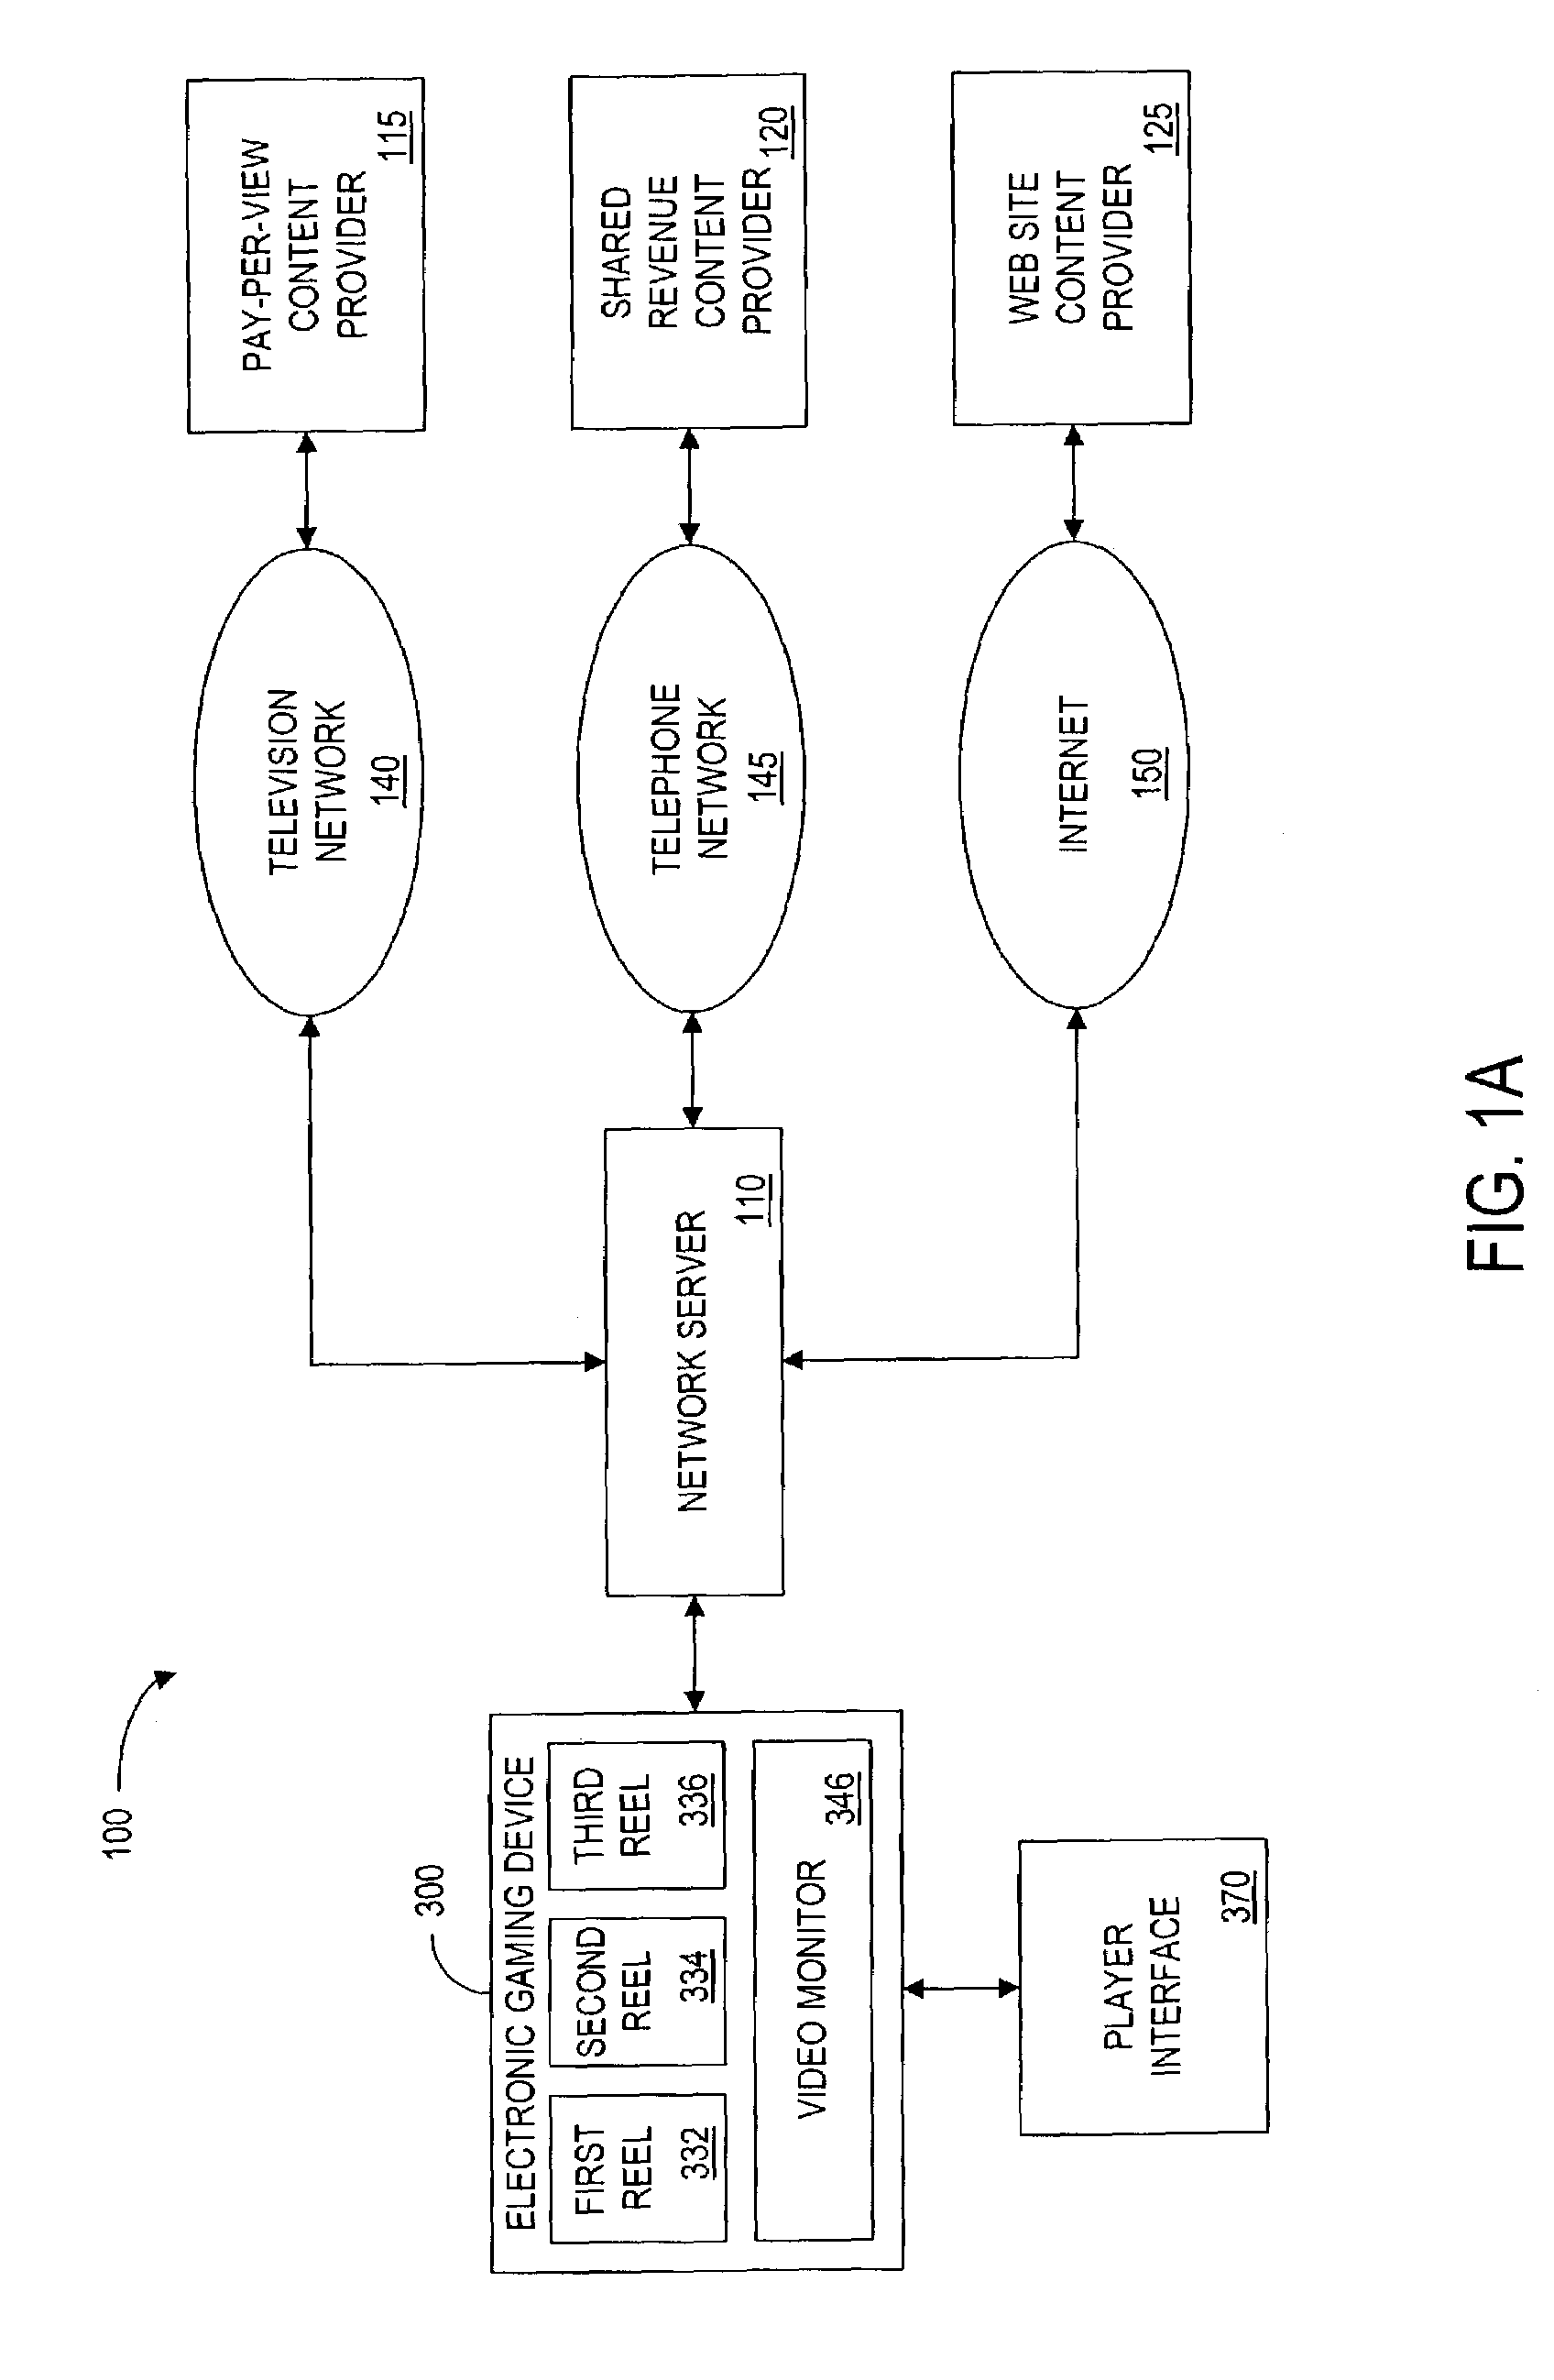 Methods and apparatus for providing entertainment content at a gaming device